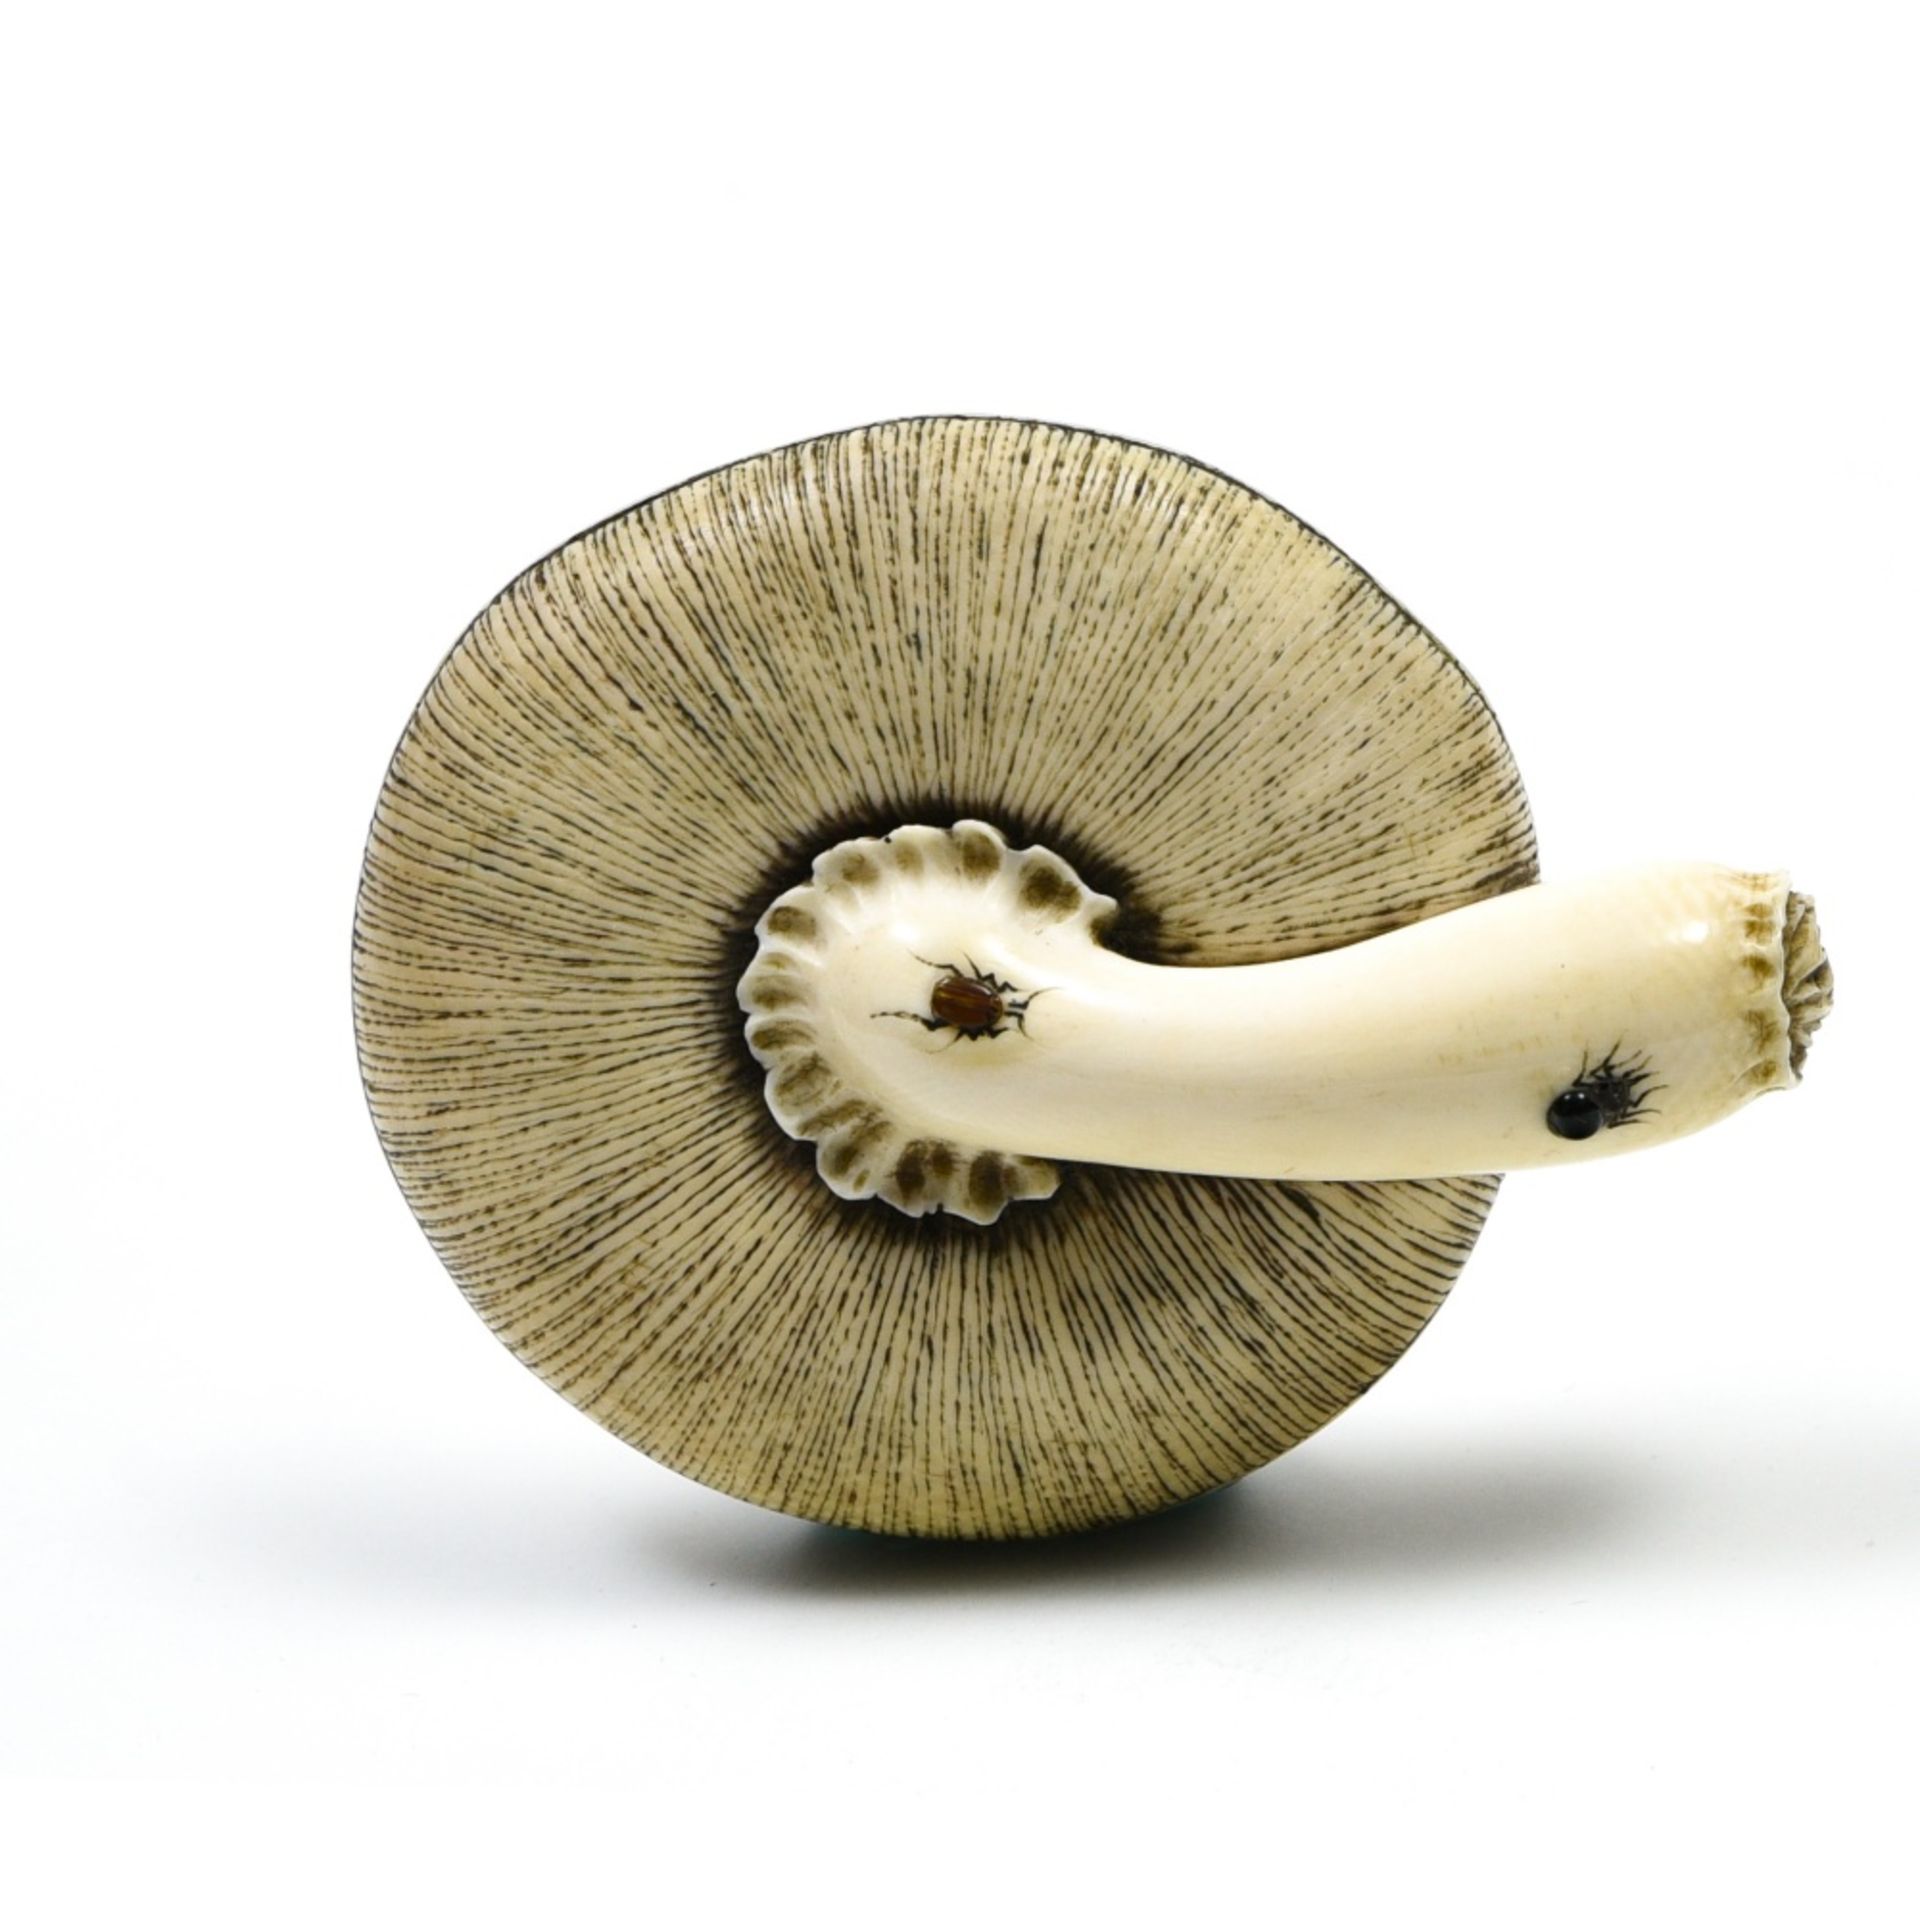 Japan, 19th century Shibayama mushroom, Carved and polished ivory with applied enamel insects. - Image 2 of 3